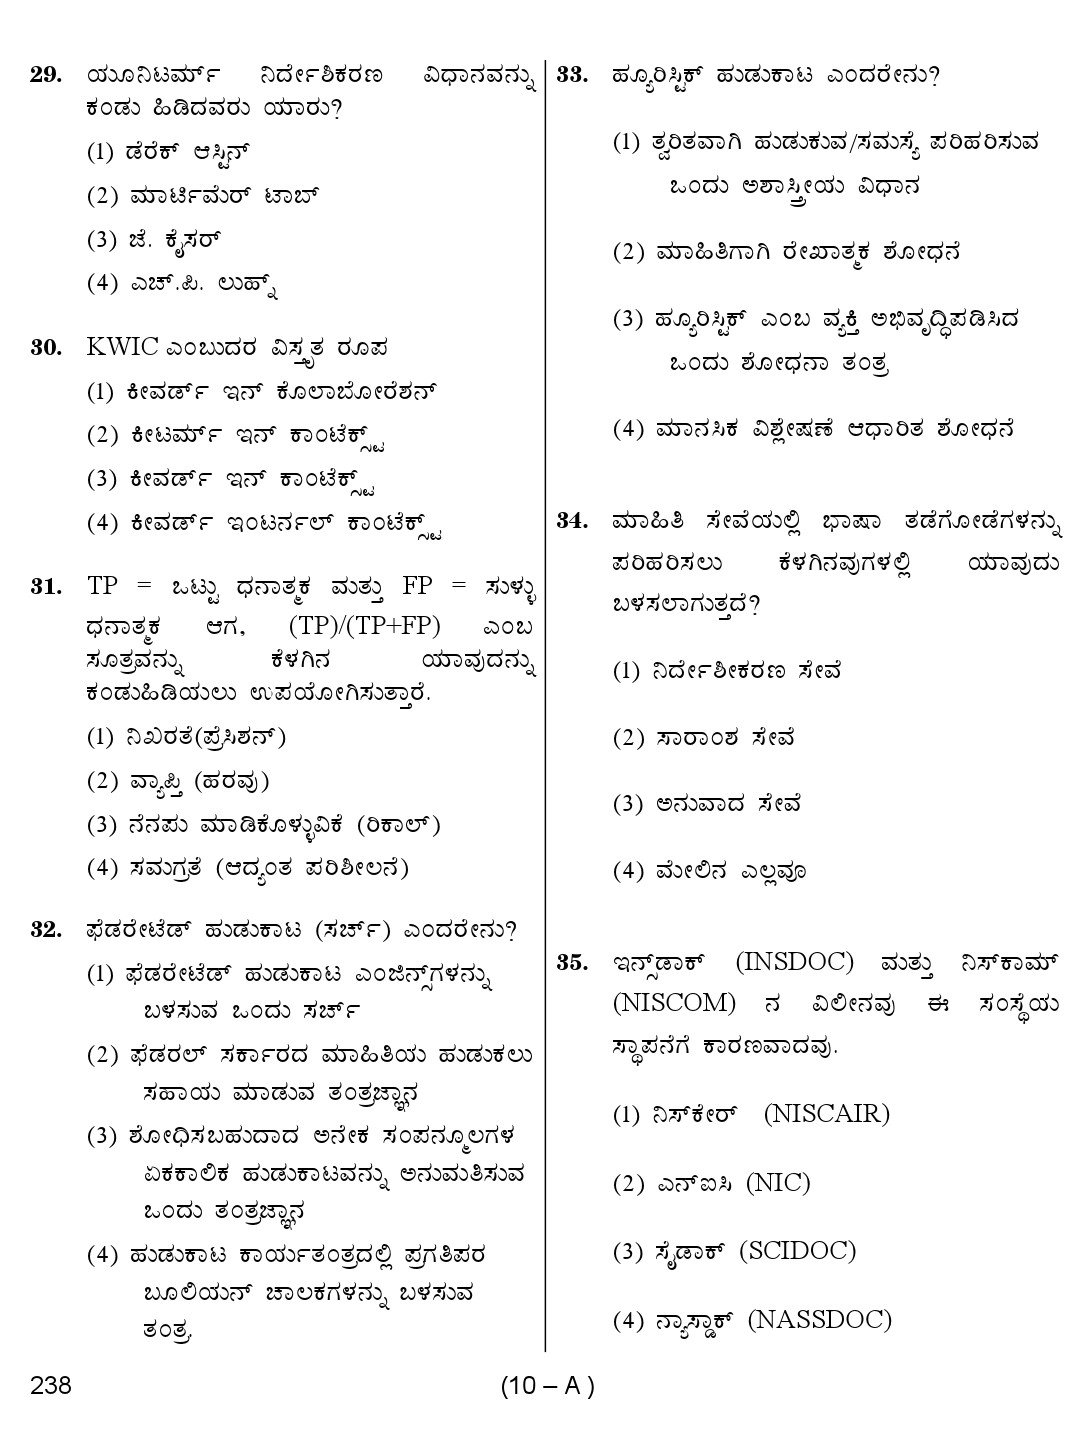 Karnataka PSC 238 Specific Paper II Librarian Exam Sample Question Paper 10